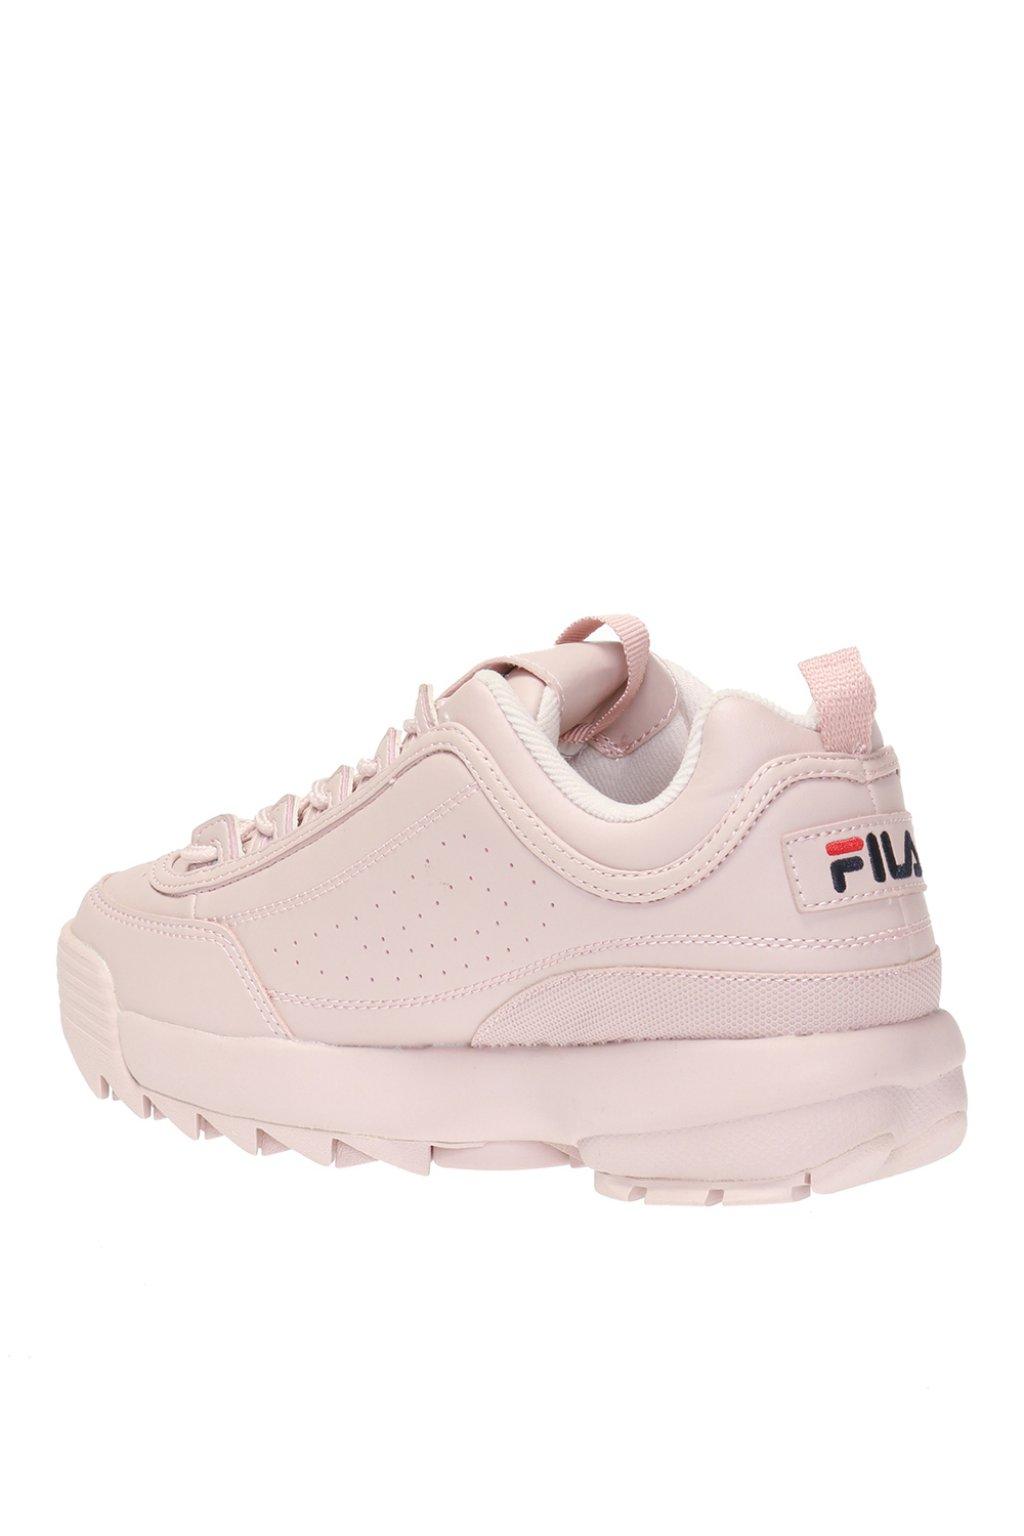 Fila Leather 'disruptor' Sneakers in White Pink (Pink) - Lyst